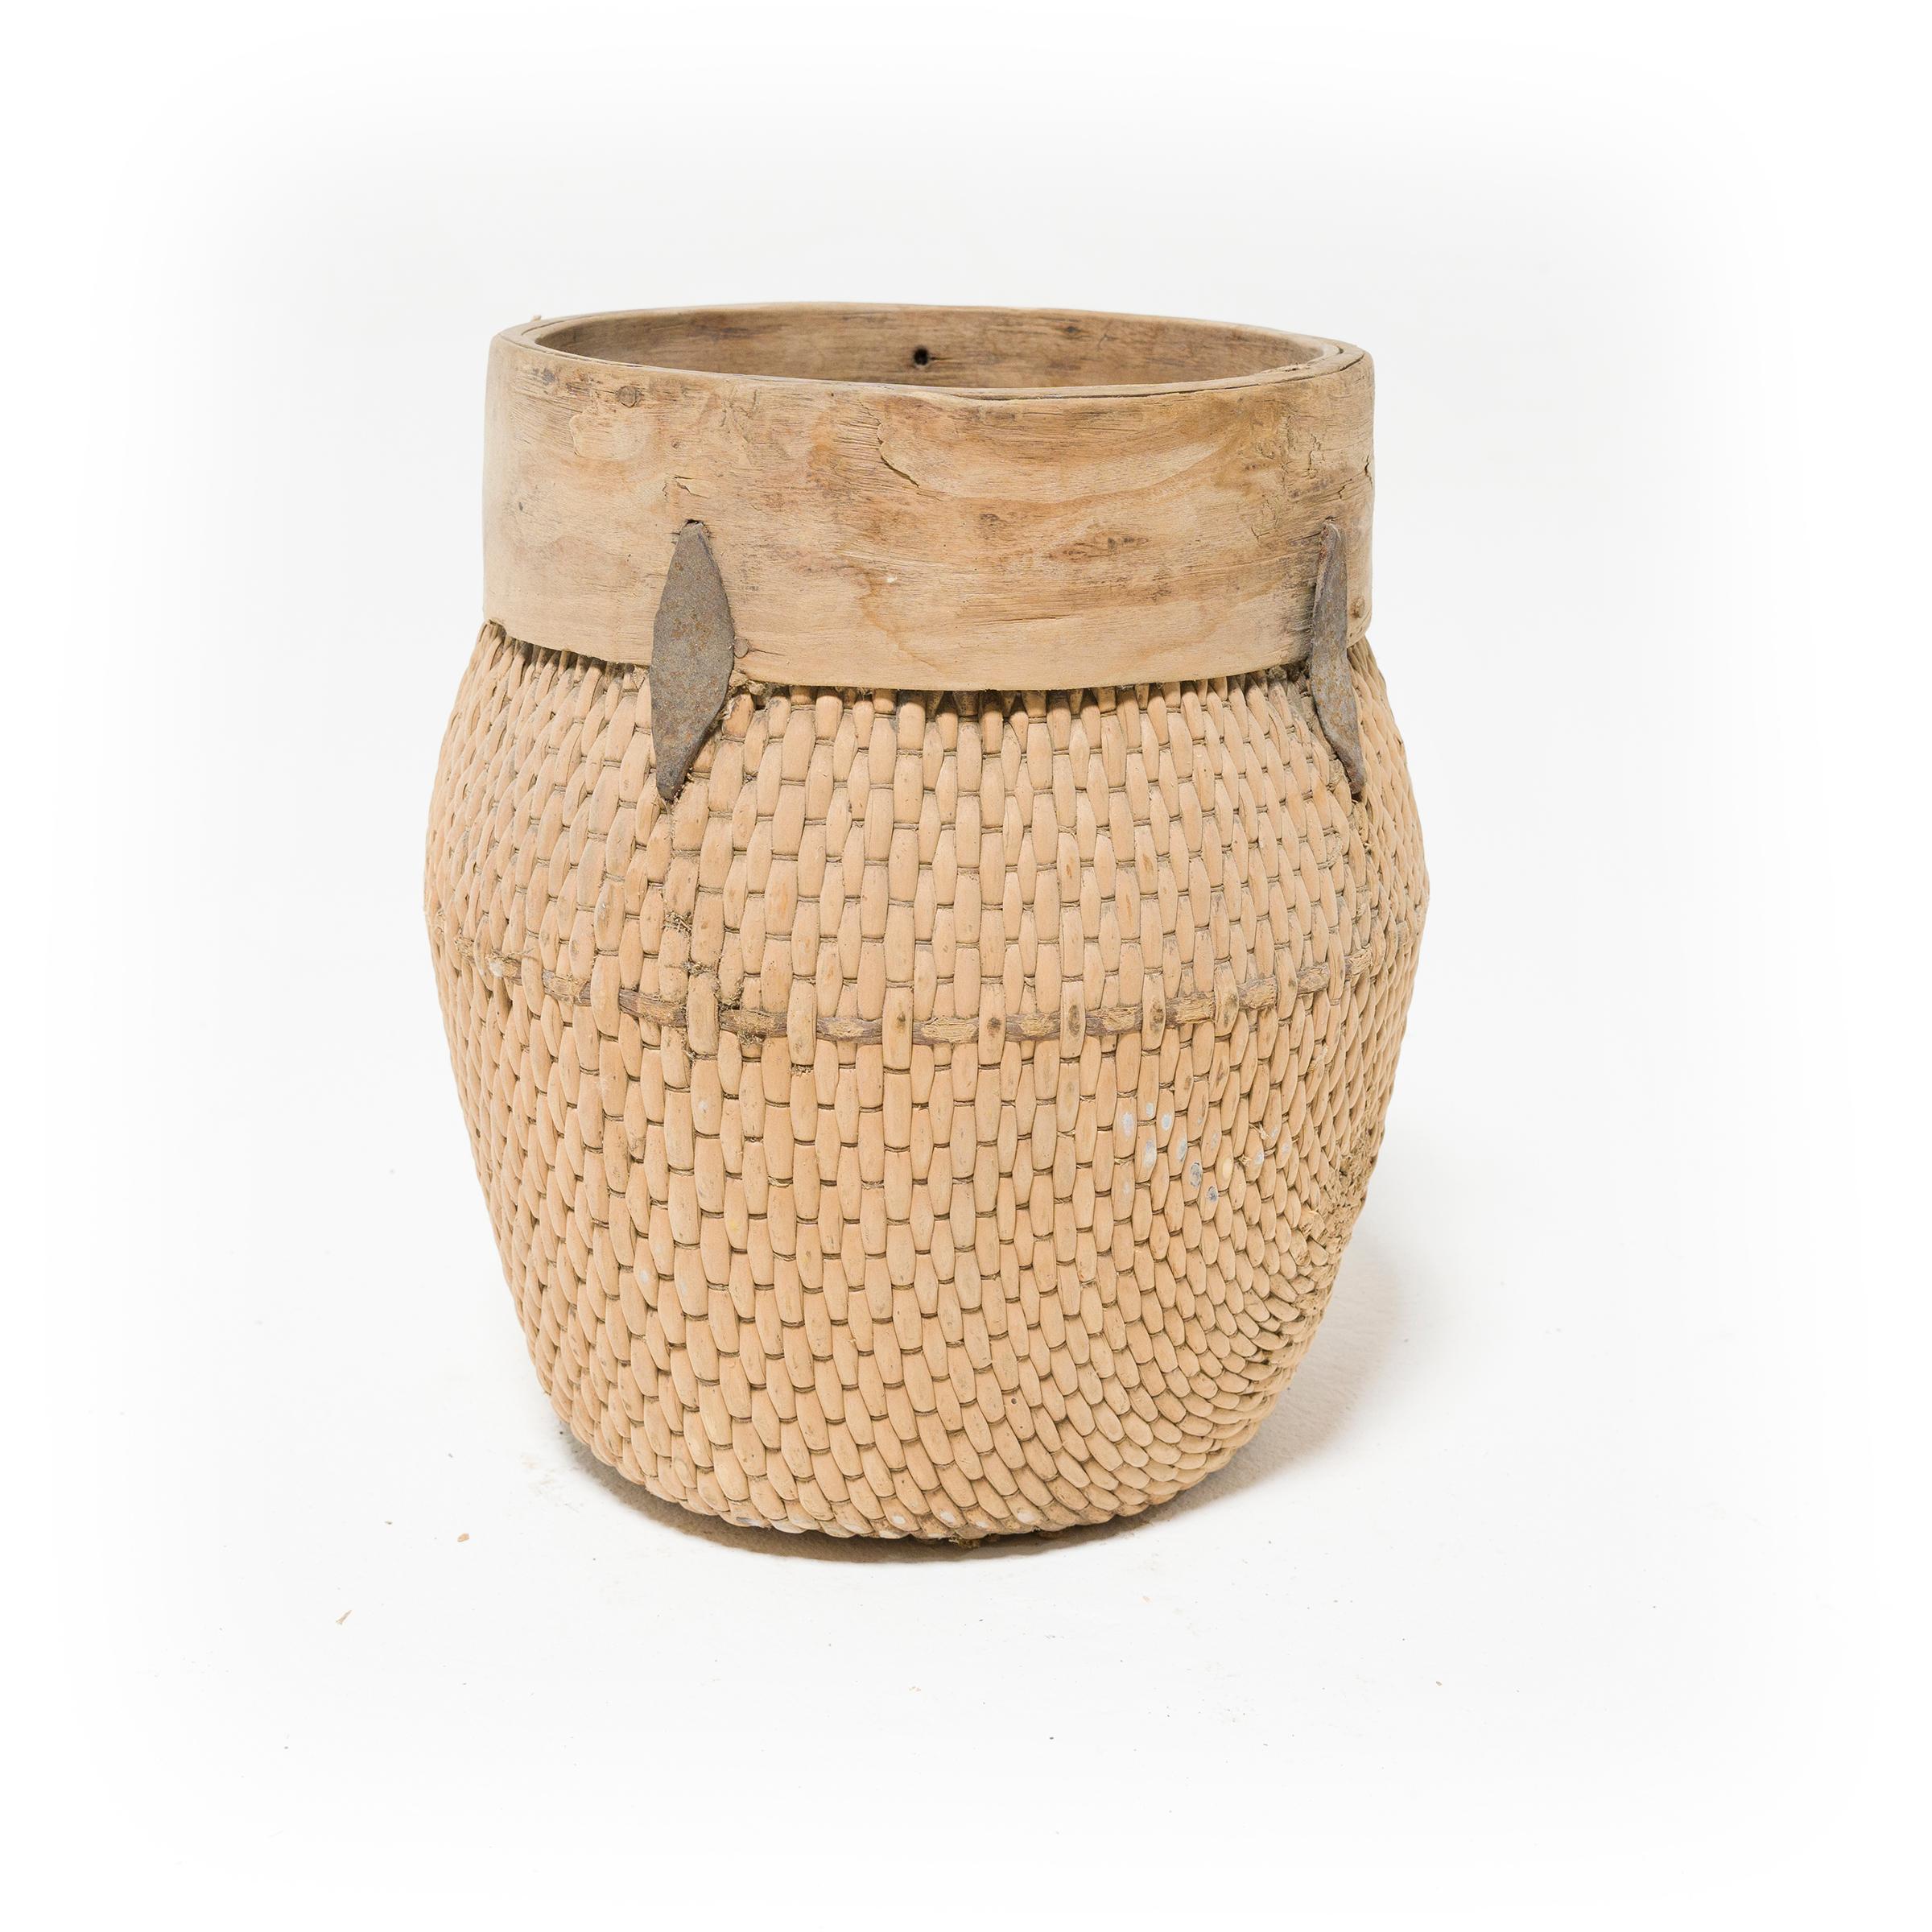 Hand-Woven Chinese Woven River Basket, c. 1900